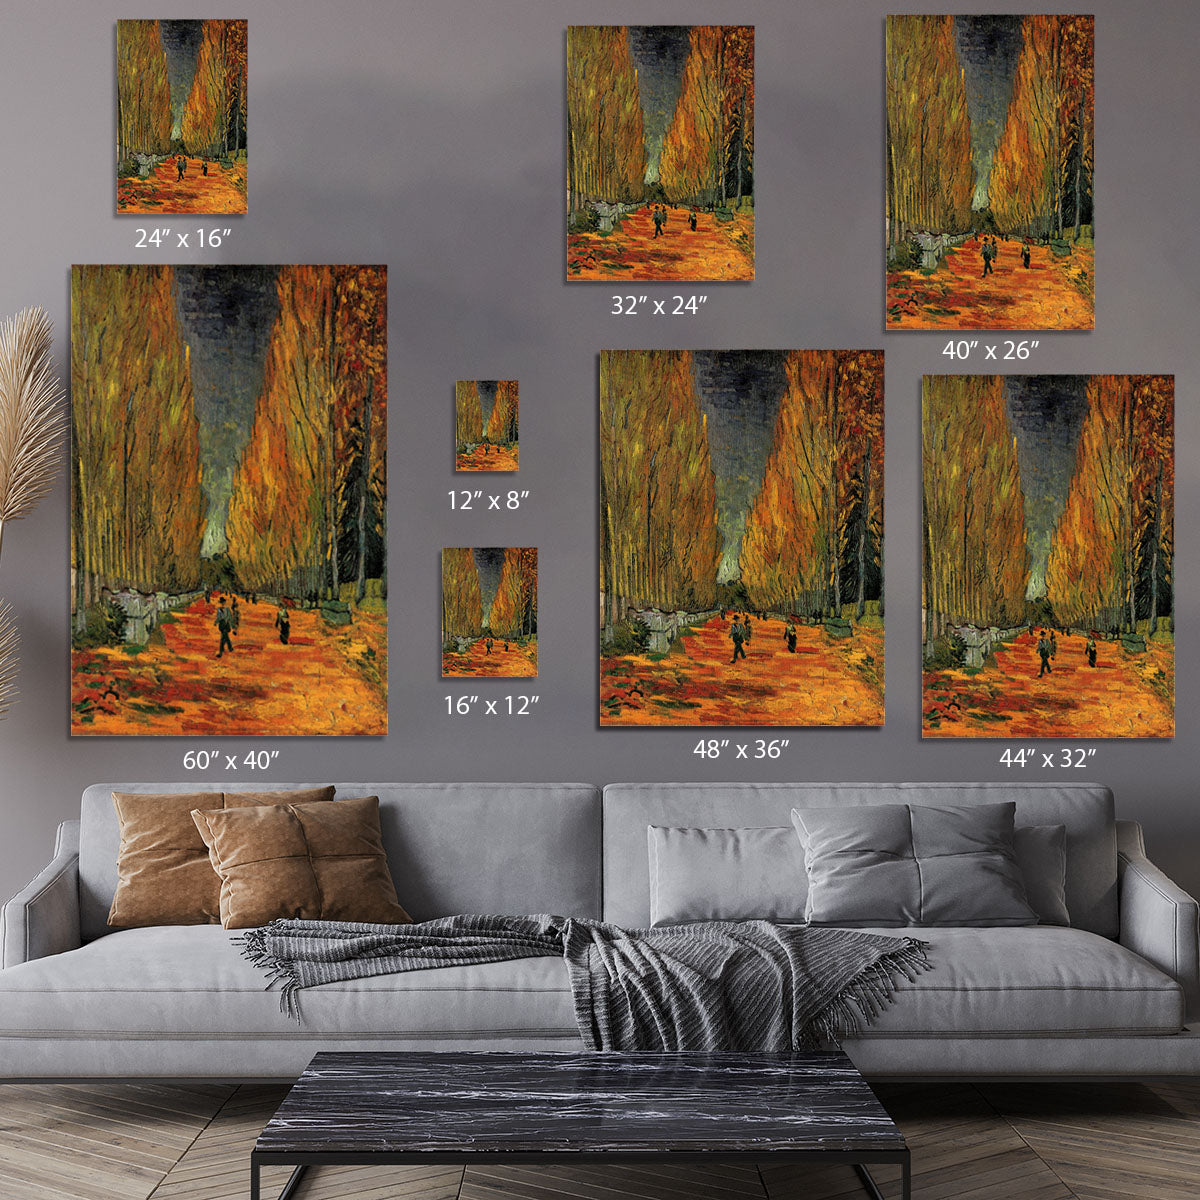 Les Alyscamps 3 by Van Gogh Canvas Print or Poster - Canvas Art Rocks - 7